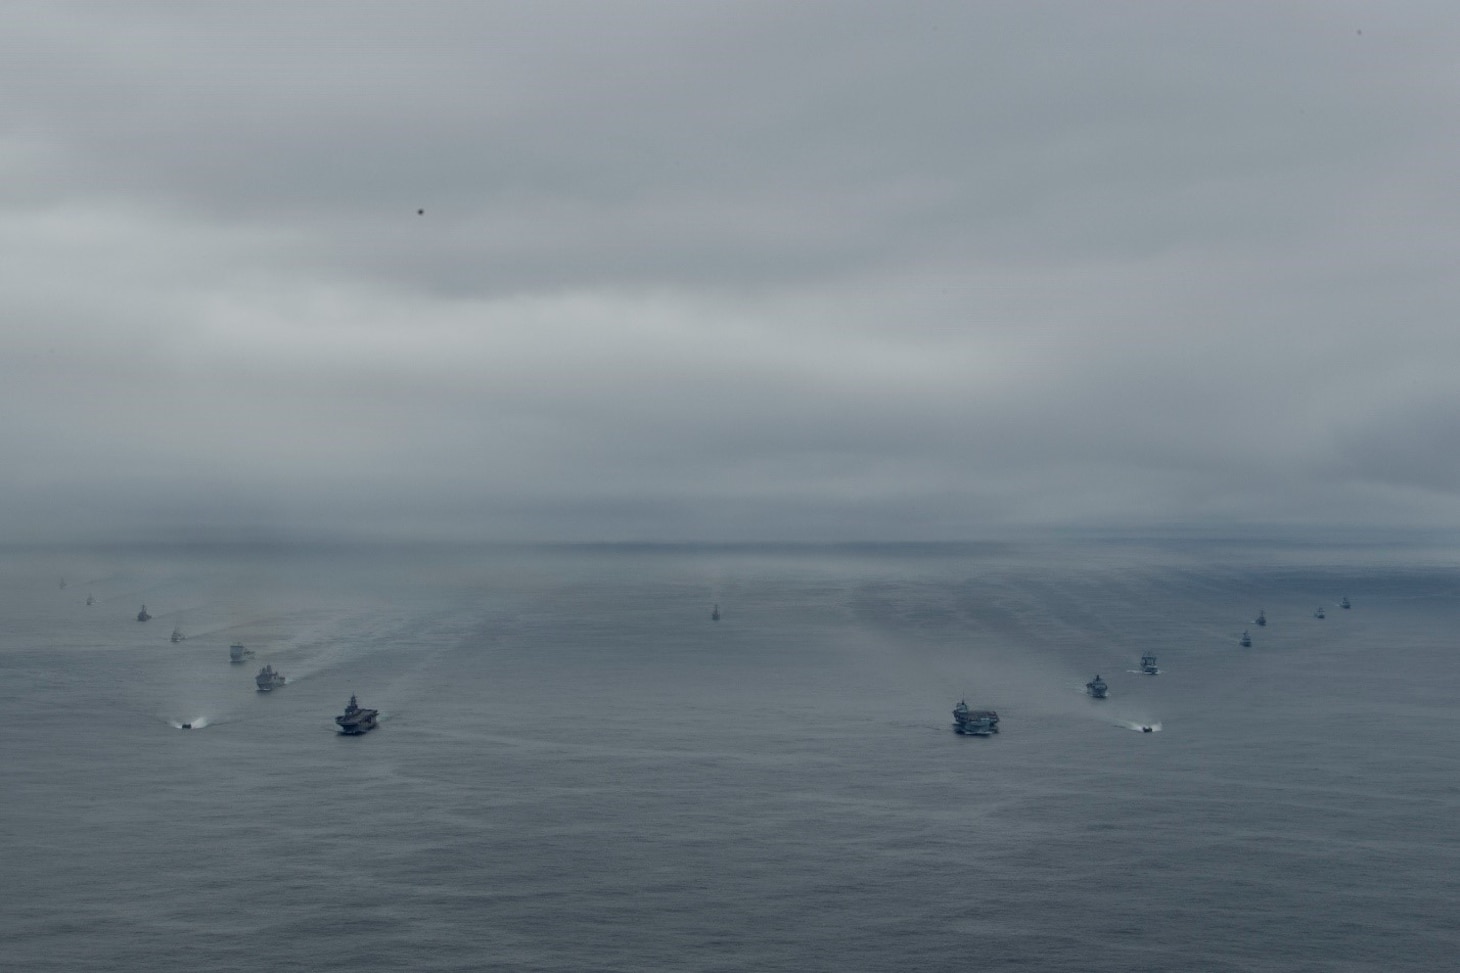 Ships from the U.S. Navy’s Iwo Jima Amphibious Ready Group (IWOARG), the Royal Navy’s Queen Elizabeth Carrier Strike Group and the French and Norwegian navies transit the Atlantic Ocean in formation during a photo exercise, May 17, 2021.